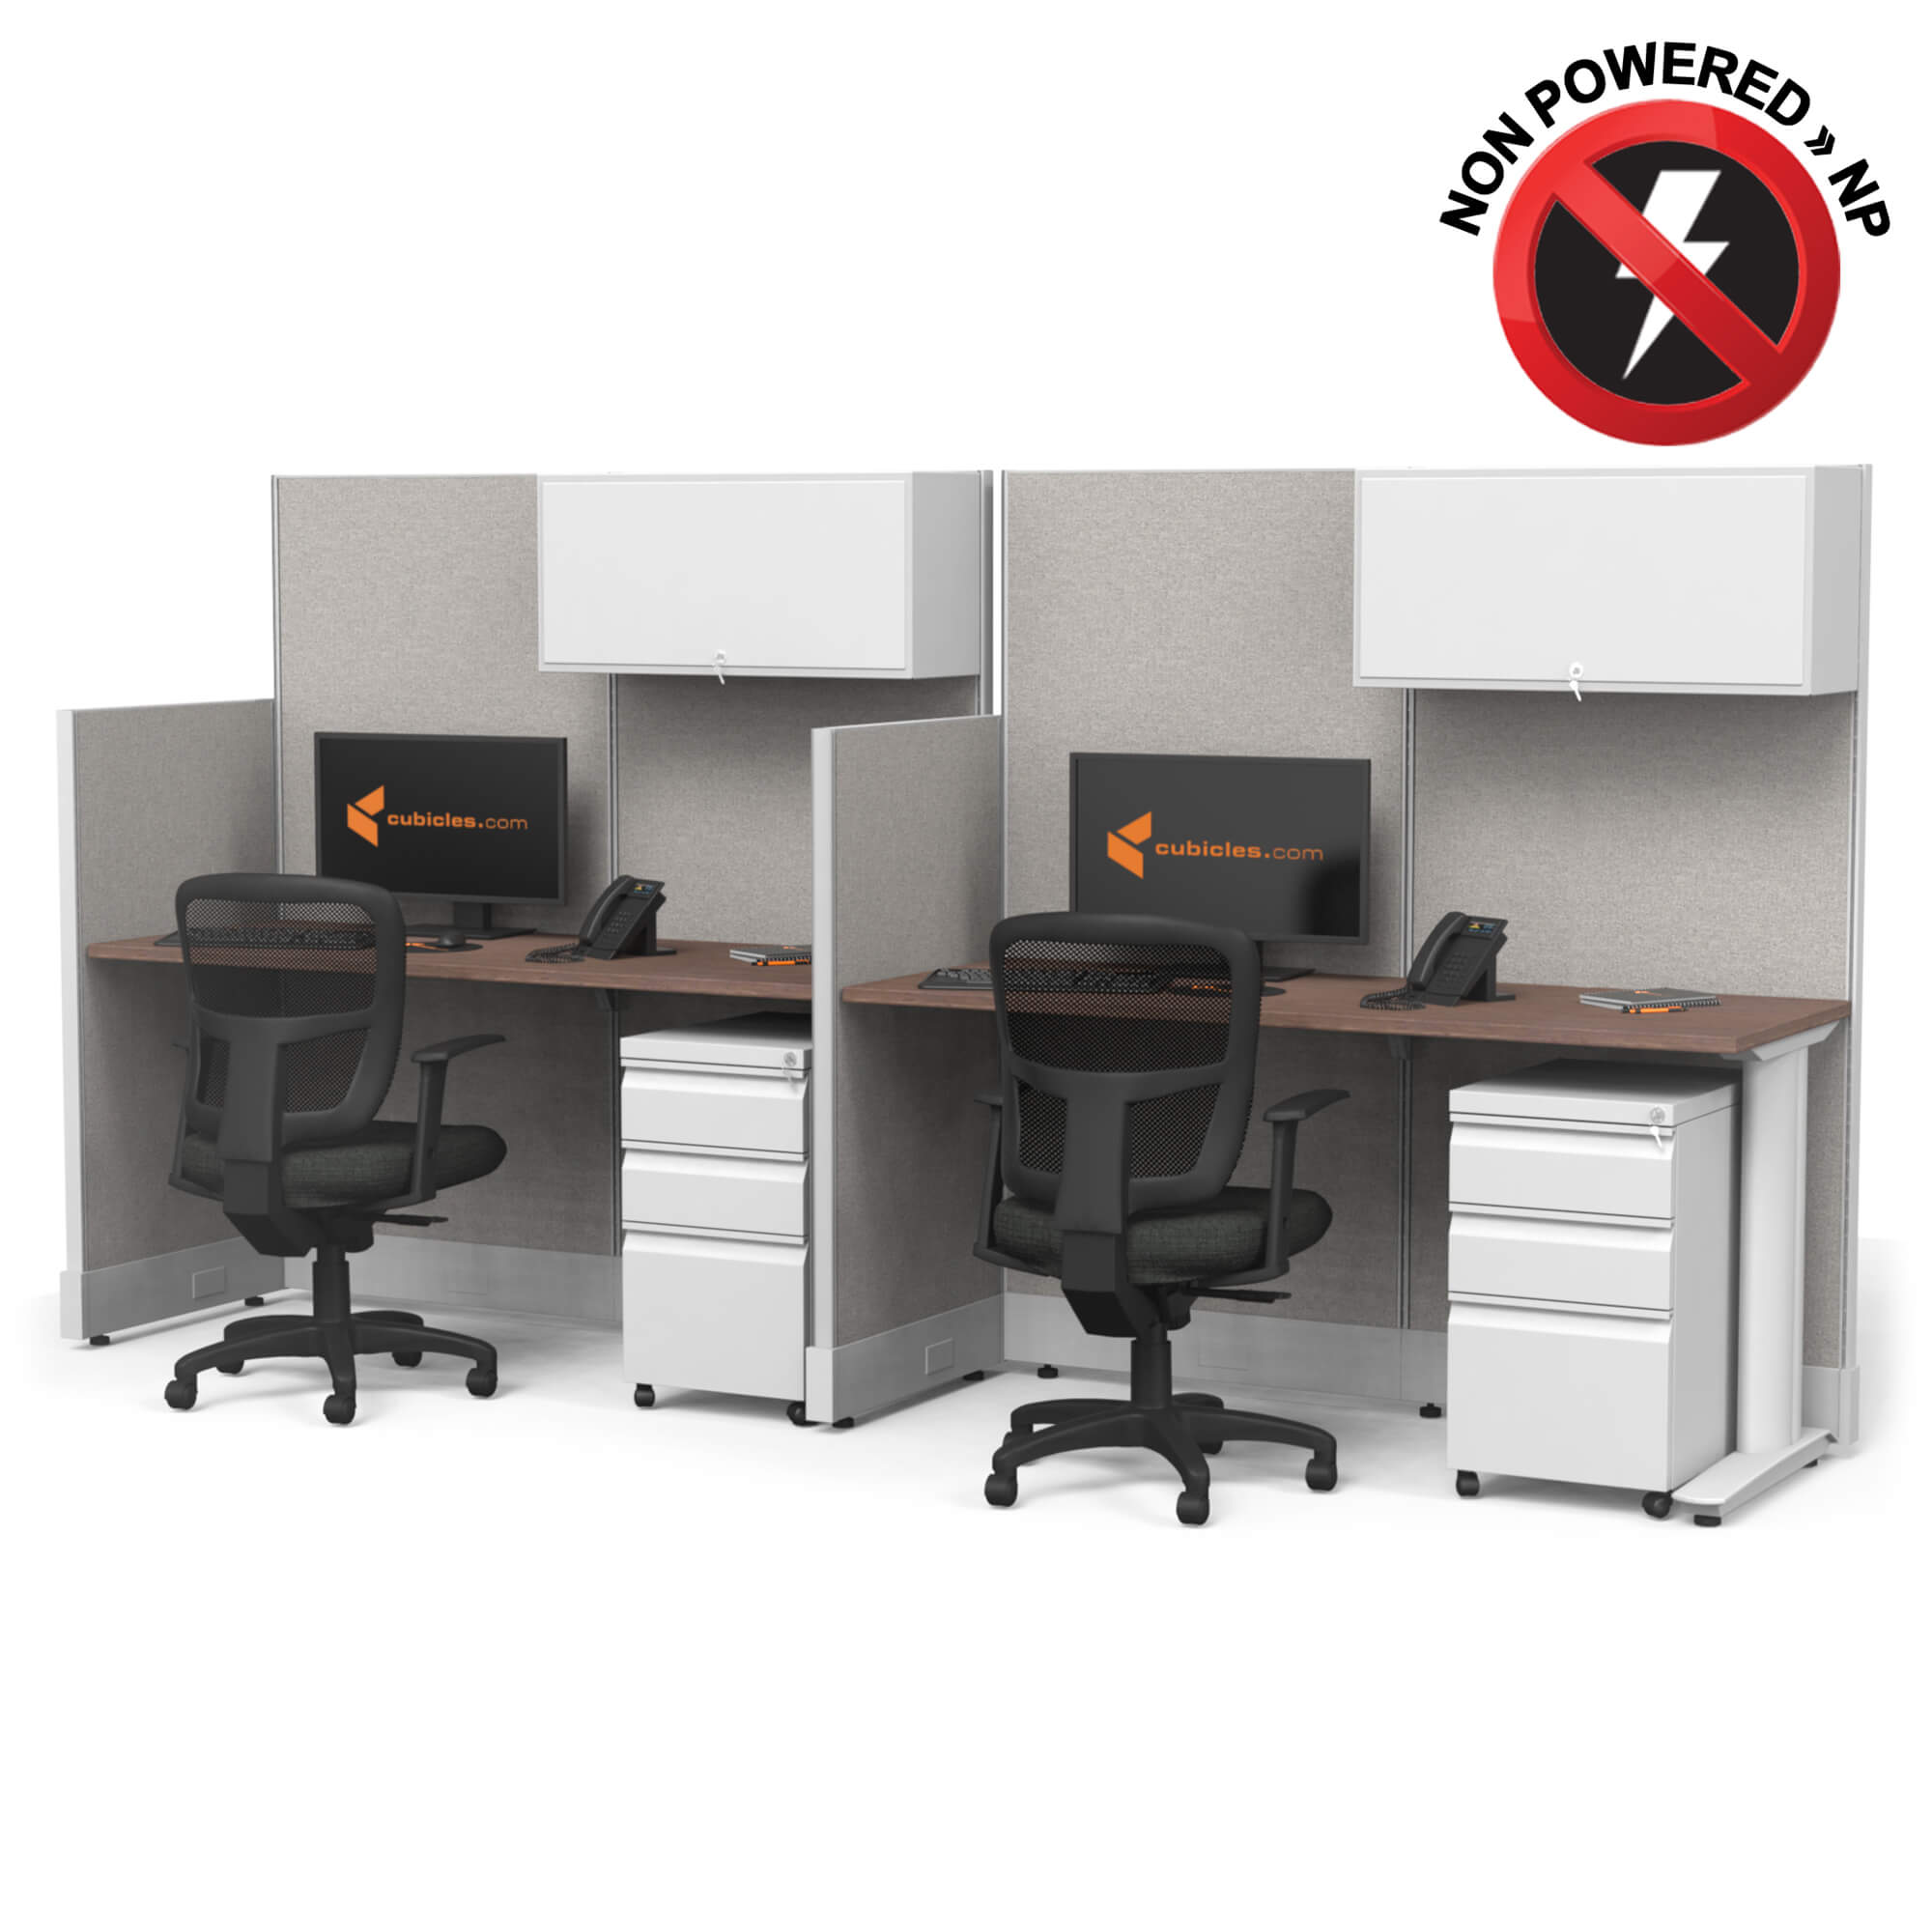 cubicle-desk-straight-workstation-2pack-inline-non-powered-with-storage-sign-1.jpg